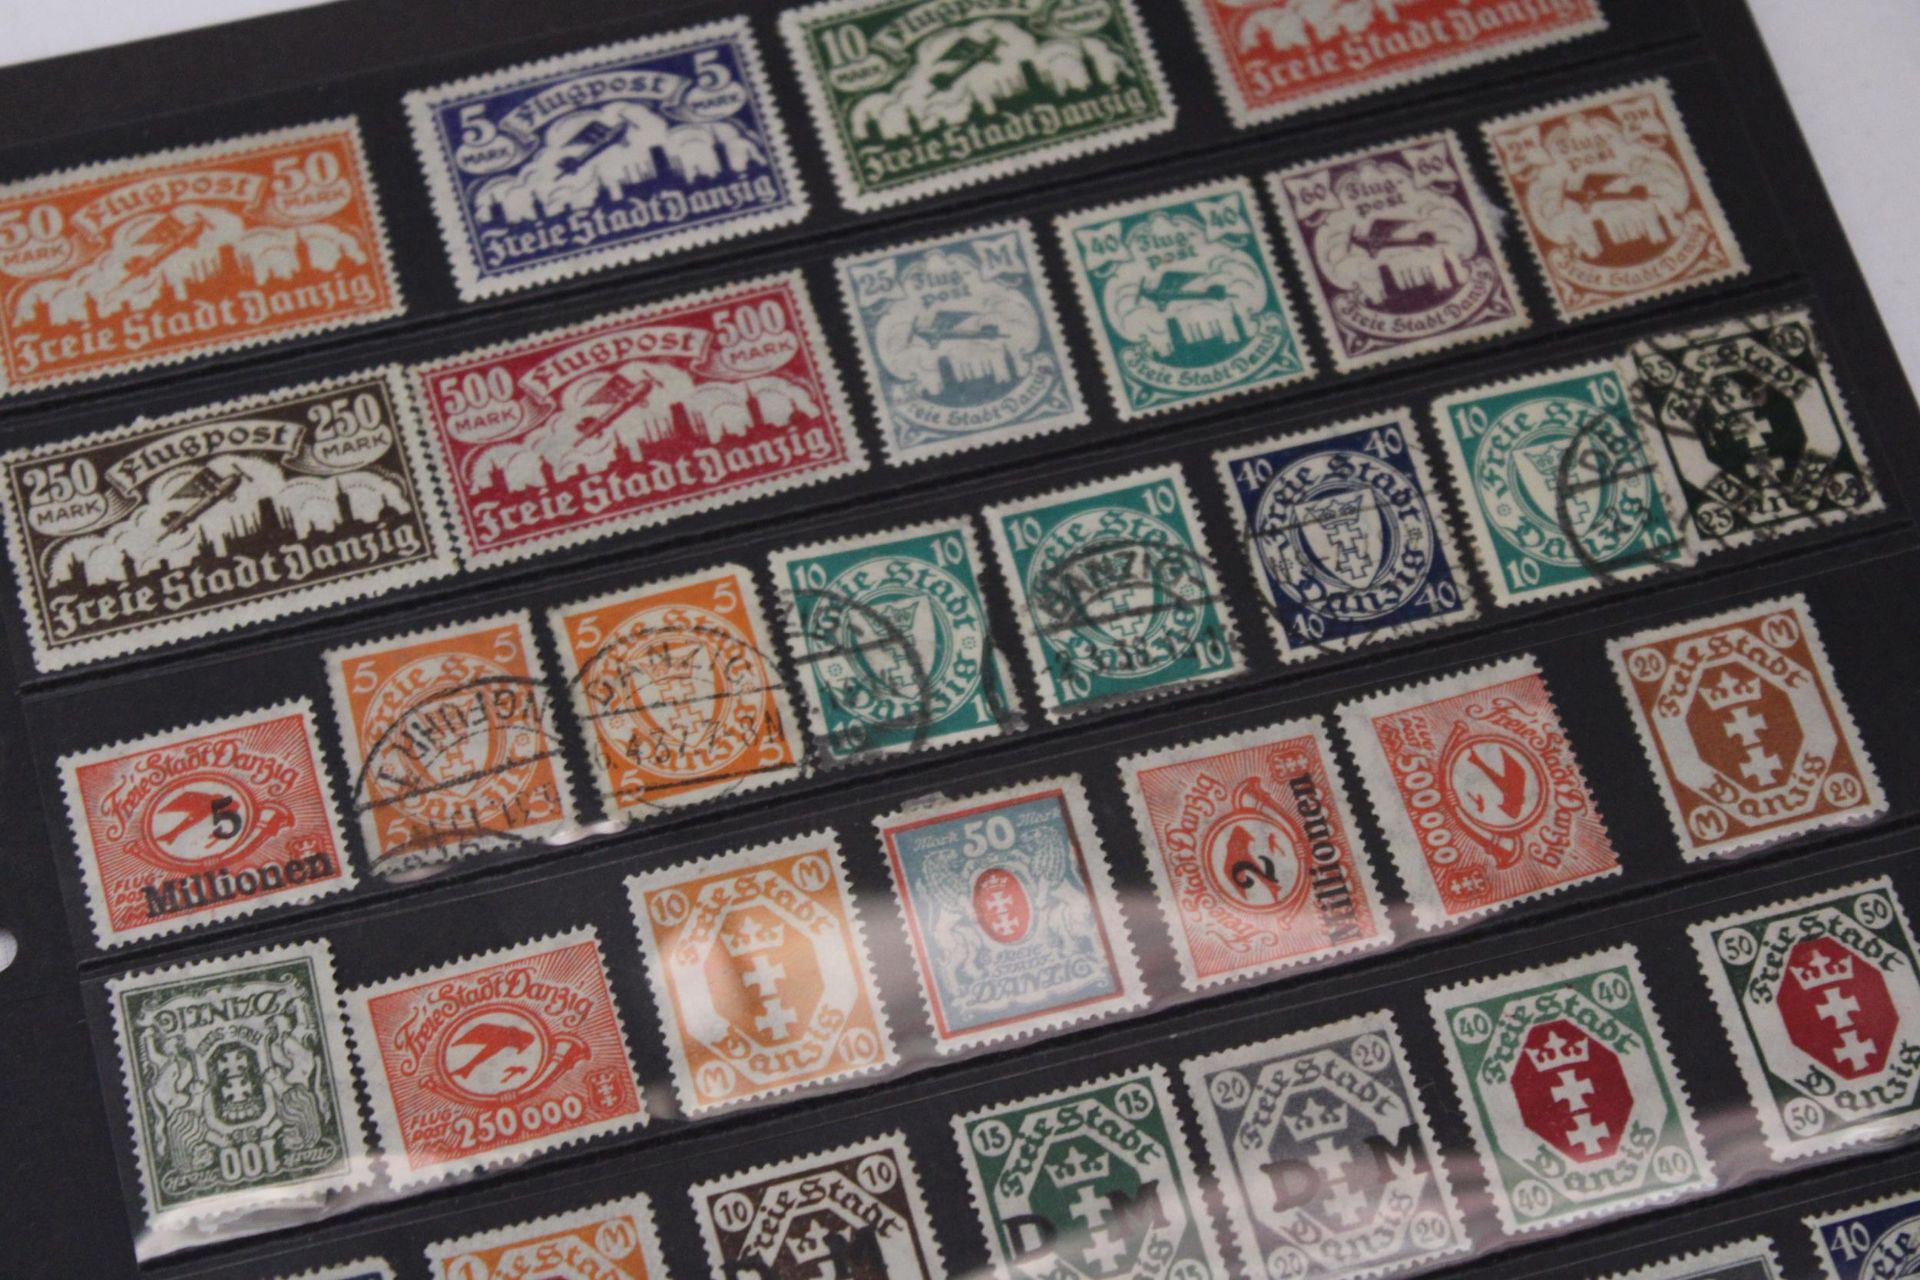 TWO PAGES OF DANZIG STAMPS - Bild 4 aus 5